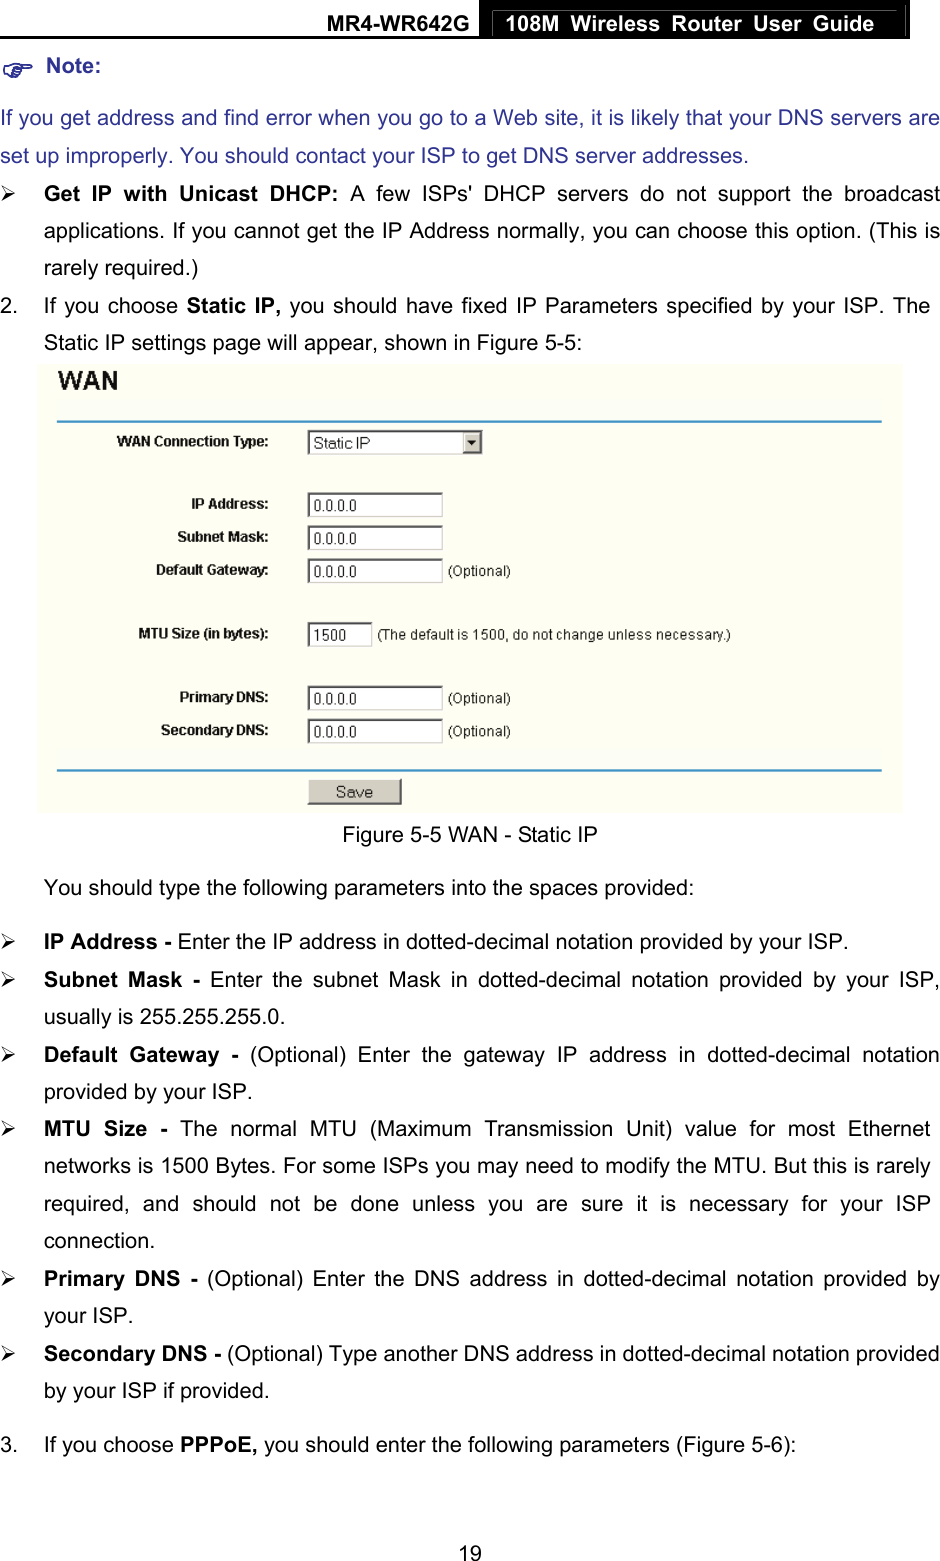 MR4-WR642G 108M Wireless Router User Guide   19) Note: If you get address and find error when you go to a Web site, it is likely that your DNS servers are set up improperly. You should contact your ISP to get DNS server addresses.   ¾ Get IP with Unicast DHCP: A few ISPs&apos; DHCP servers do not support the broadcast applications. If you cannot get the IP Address normally, you can choose this option. (This is rarely required.) 2.  If you choose Static IP, you should have fixed IP Parameters specified by your ISP. The Static IP settings page will appear, shown in Figure 5-5:  Figure 5-5 WAN - Static IP You should type the following parameters into the spaces provided: ¾ IP Address - Enter the IP address in dotted-decimal notation provided by your ISP. ¾ Subnet Mask - Enter the subnet Mask in dotted-decimal notation provided by your ISP, usually is 255.255.255.0. ¾ Default Gateway - (Optional) Enter the gateway IP address in dotted-decimal notation provided by your ISP. ¾ MTU Size - The normal MTU (Maximum Transmission Unit) value for most Ethernet networks is 1500 Bytes. For some ISPs you may need to modify the MTU. But this is rarely required, and should not be done unless you are sure it is necessary for your ISP connection. ¾ Primary DNS - (Optional) Enter the DNS address in dotted-decimal notation provided by your ISP. ¾ Secondary DNS - (Optional) Type another DNS address in dotted-decimal notation provided by your ISP if provided. 3.  If you choose PPPoE, you should enter the following parameters (Figure 5-6):   